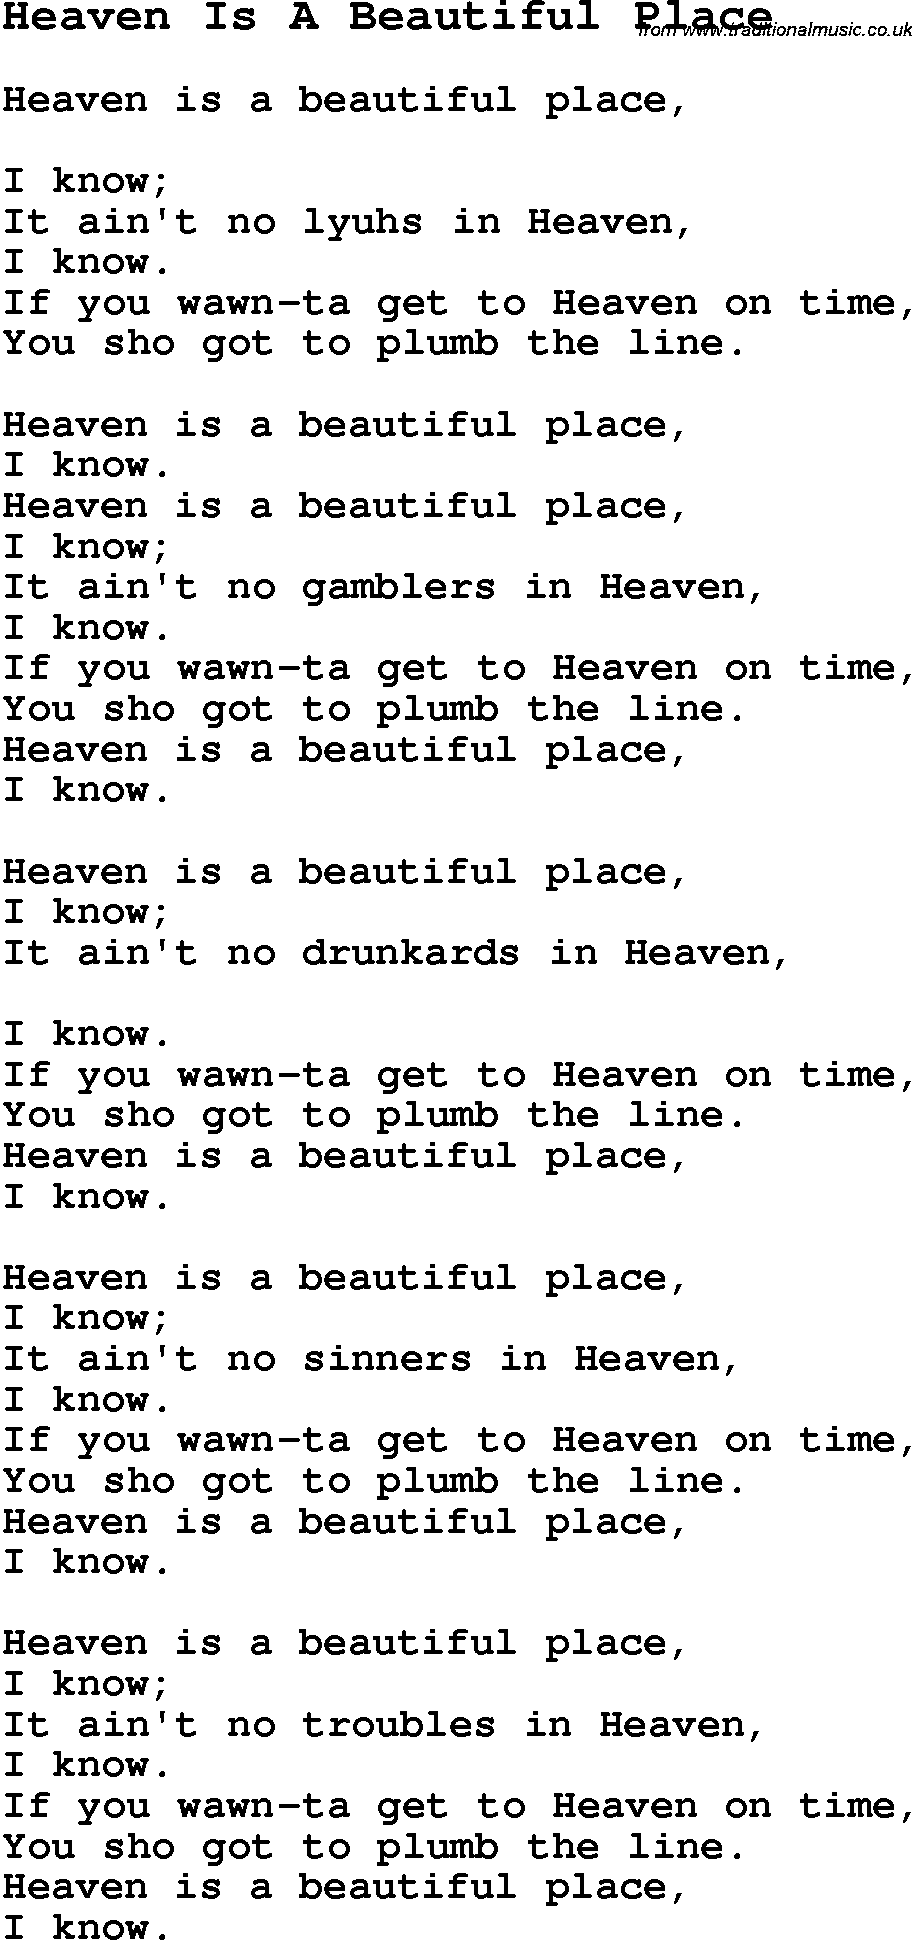 Negro Spiritual Song Lyrics for Heaven Is A Beautiful Place